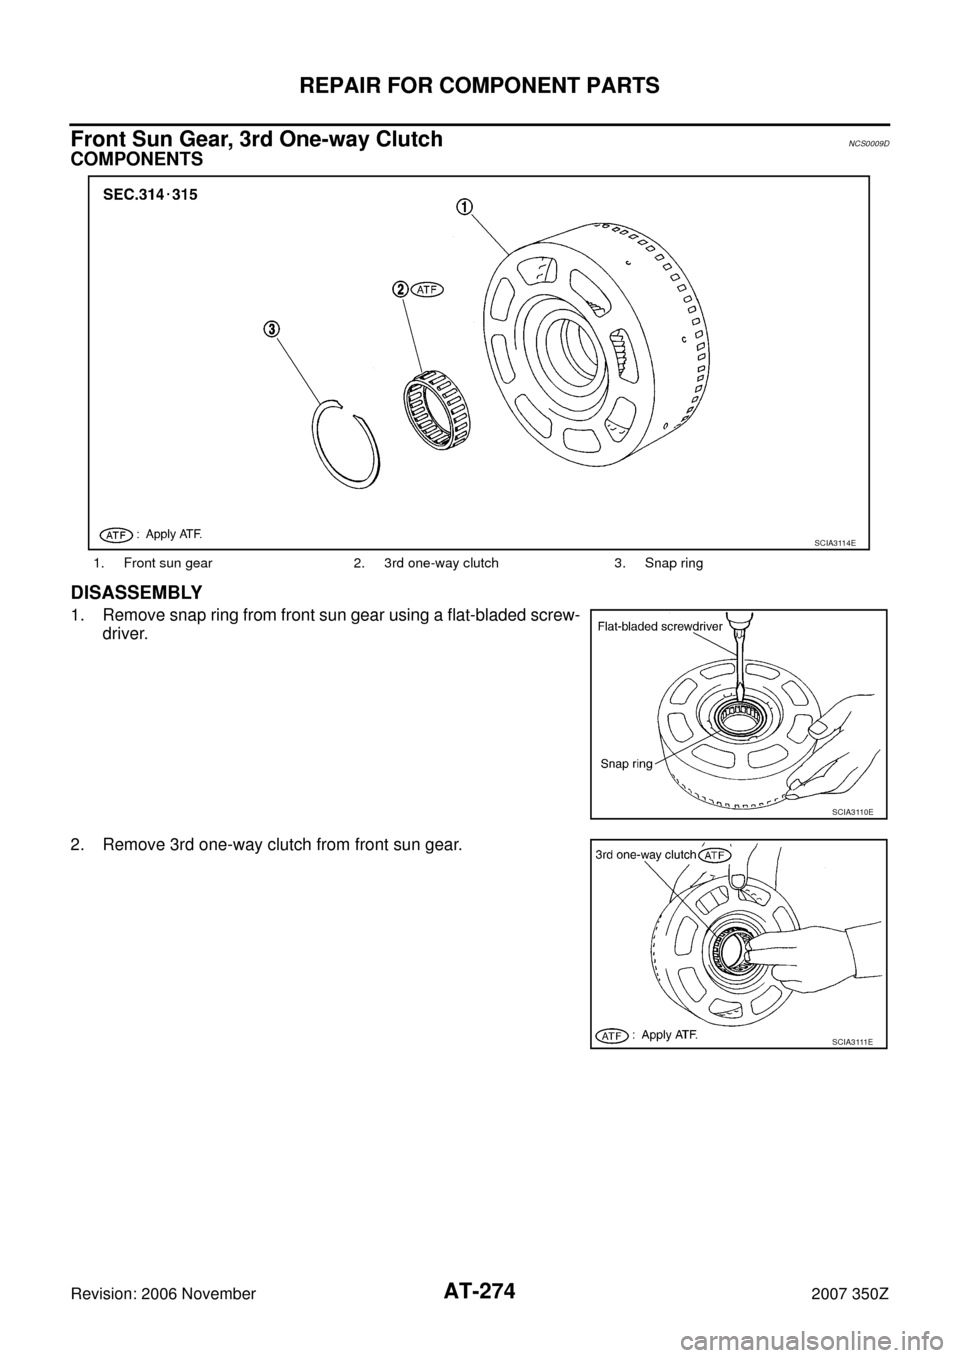 NISSAN 350Z 2007 Z33 Automatic Transmission Workshop Manual AT-274
REPAIR FOR COMPONENT PARTS
Revision: 2006 November2007 350Z
Front Sun Gear, 3rd One-way ClutchNCS0009D
COMPONENTS
DISASSEMBLY
1. Remove snap ring from front sun gear using a flat-bladed screw-
